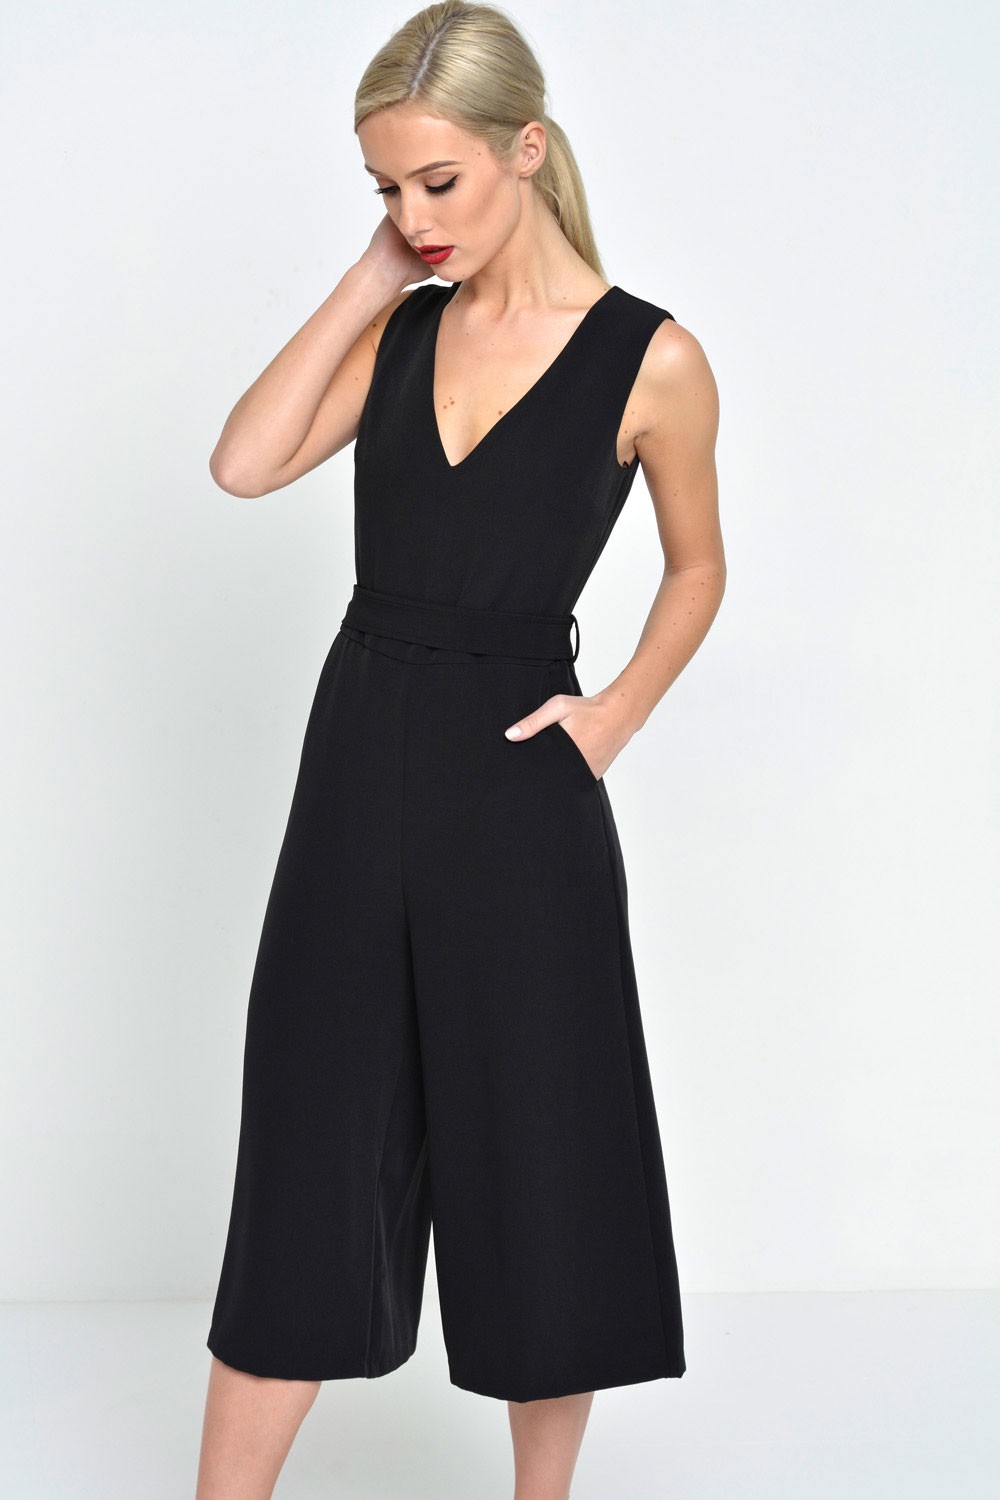 iCLOTHING Donna Culotte Jumpsuit in Black | iCLOTHING